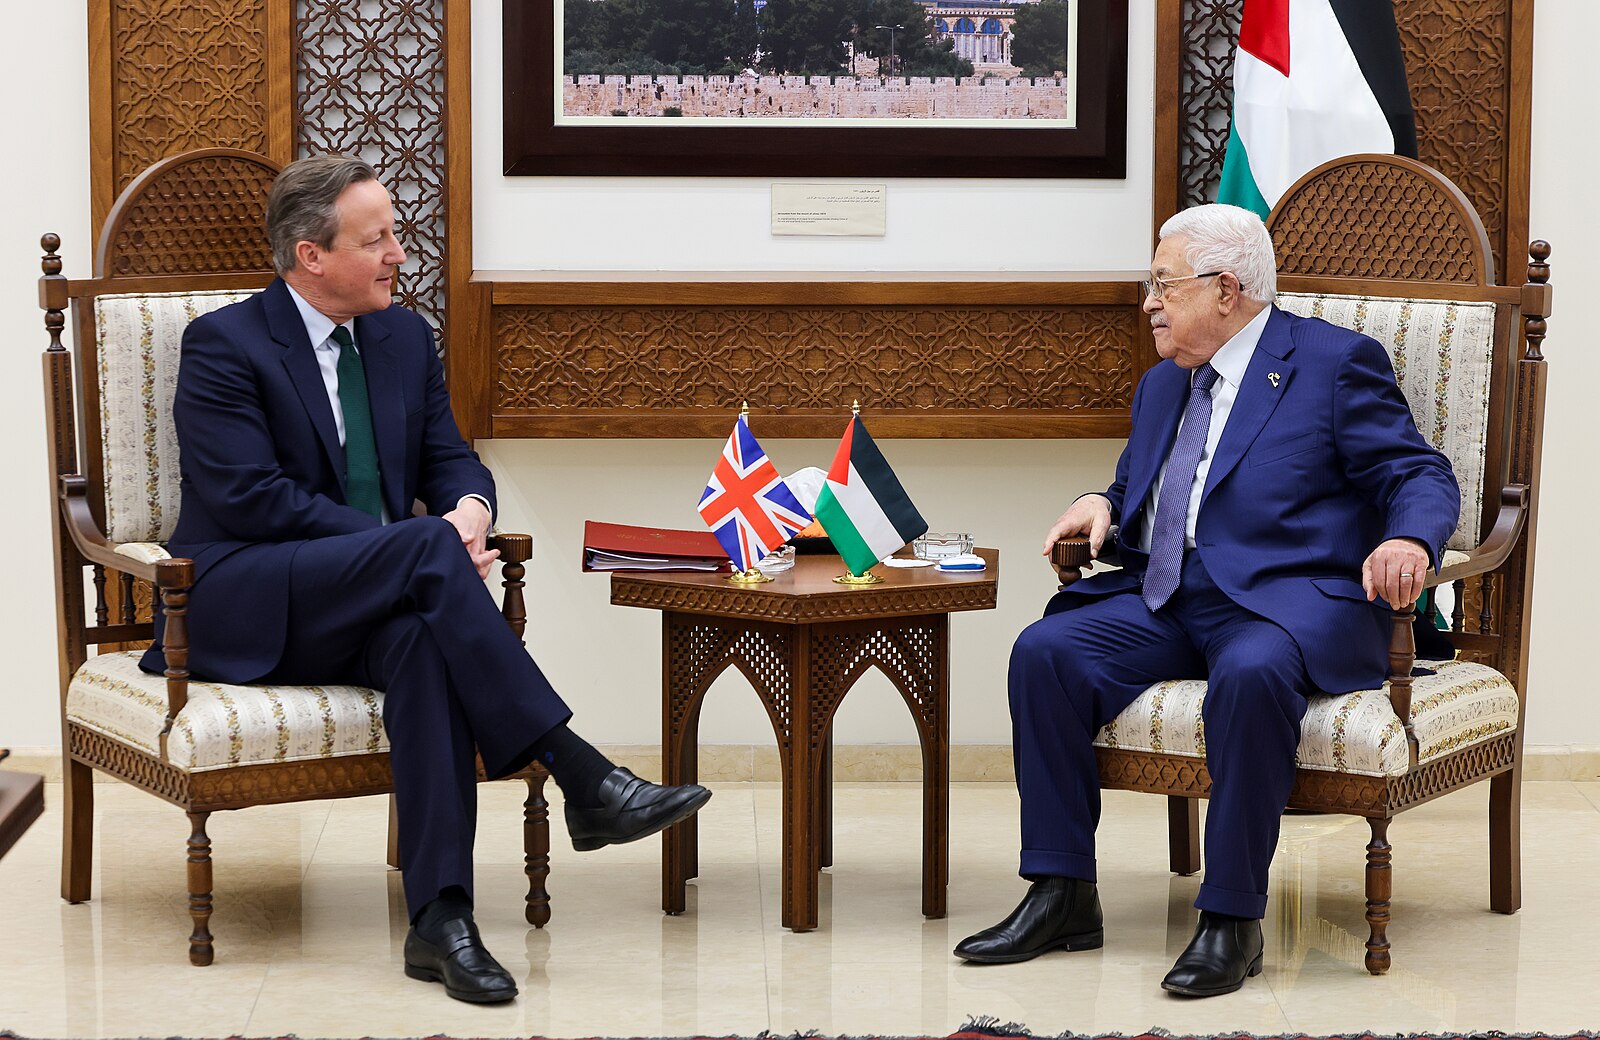 British Foreign Secretary: ‘UK considering recognition of a Palestinian state’